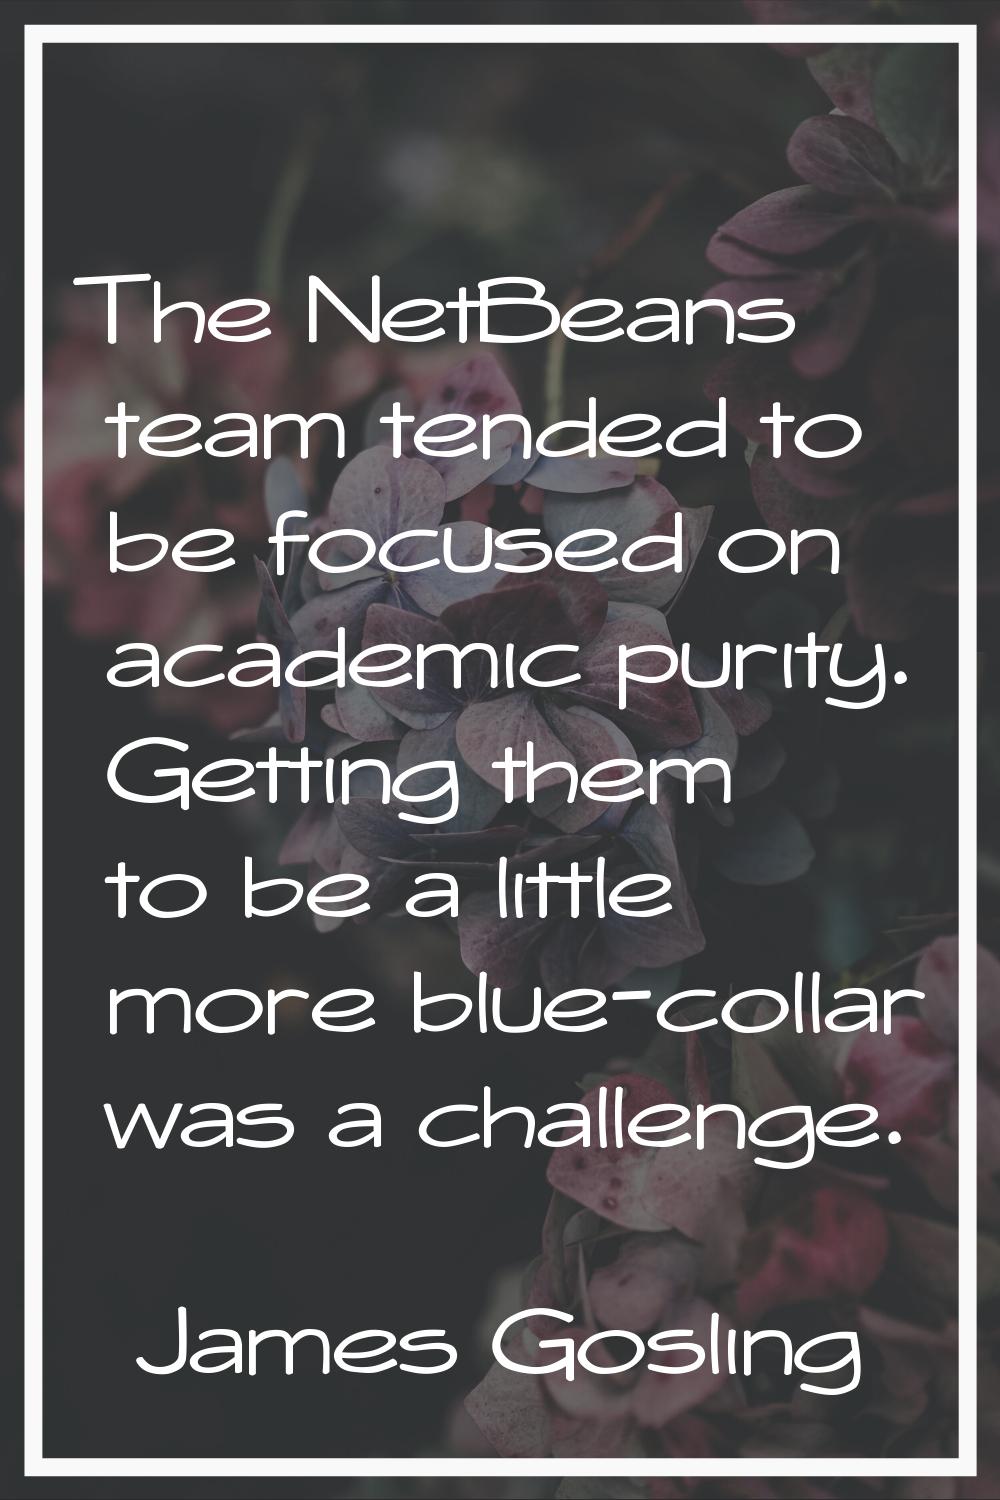 The NetBeans team tended to be focused on academic purity. Getting them to be a little more blue-co